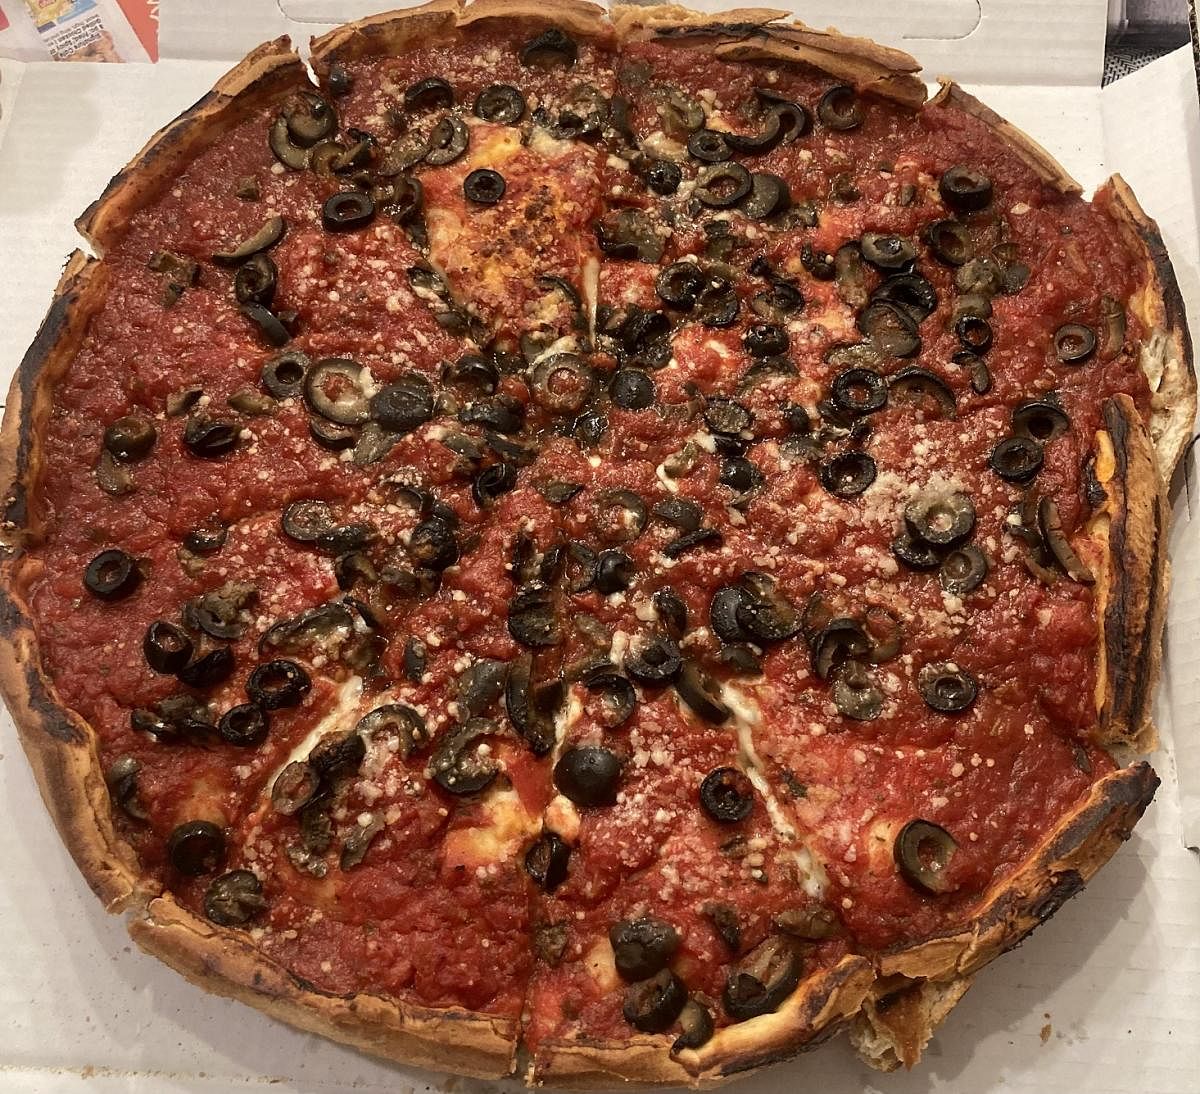 Dig into Chicago’s deep-dish pizza